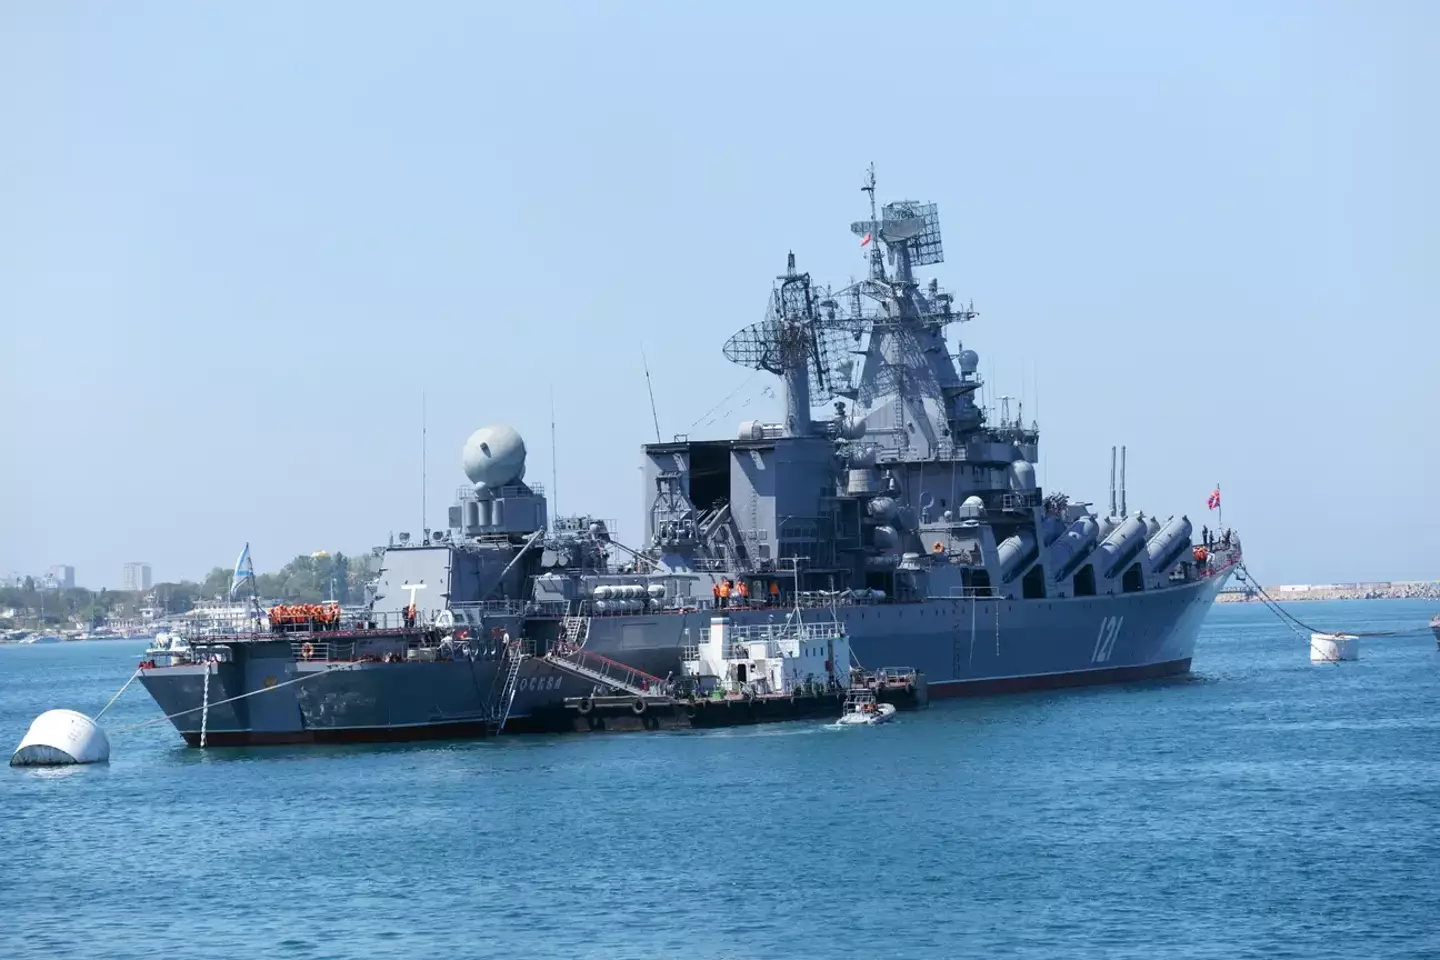 The Moskva was reportedly damaged by Ukrainian missiles.